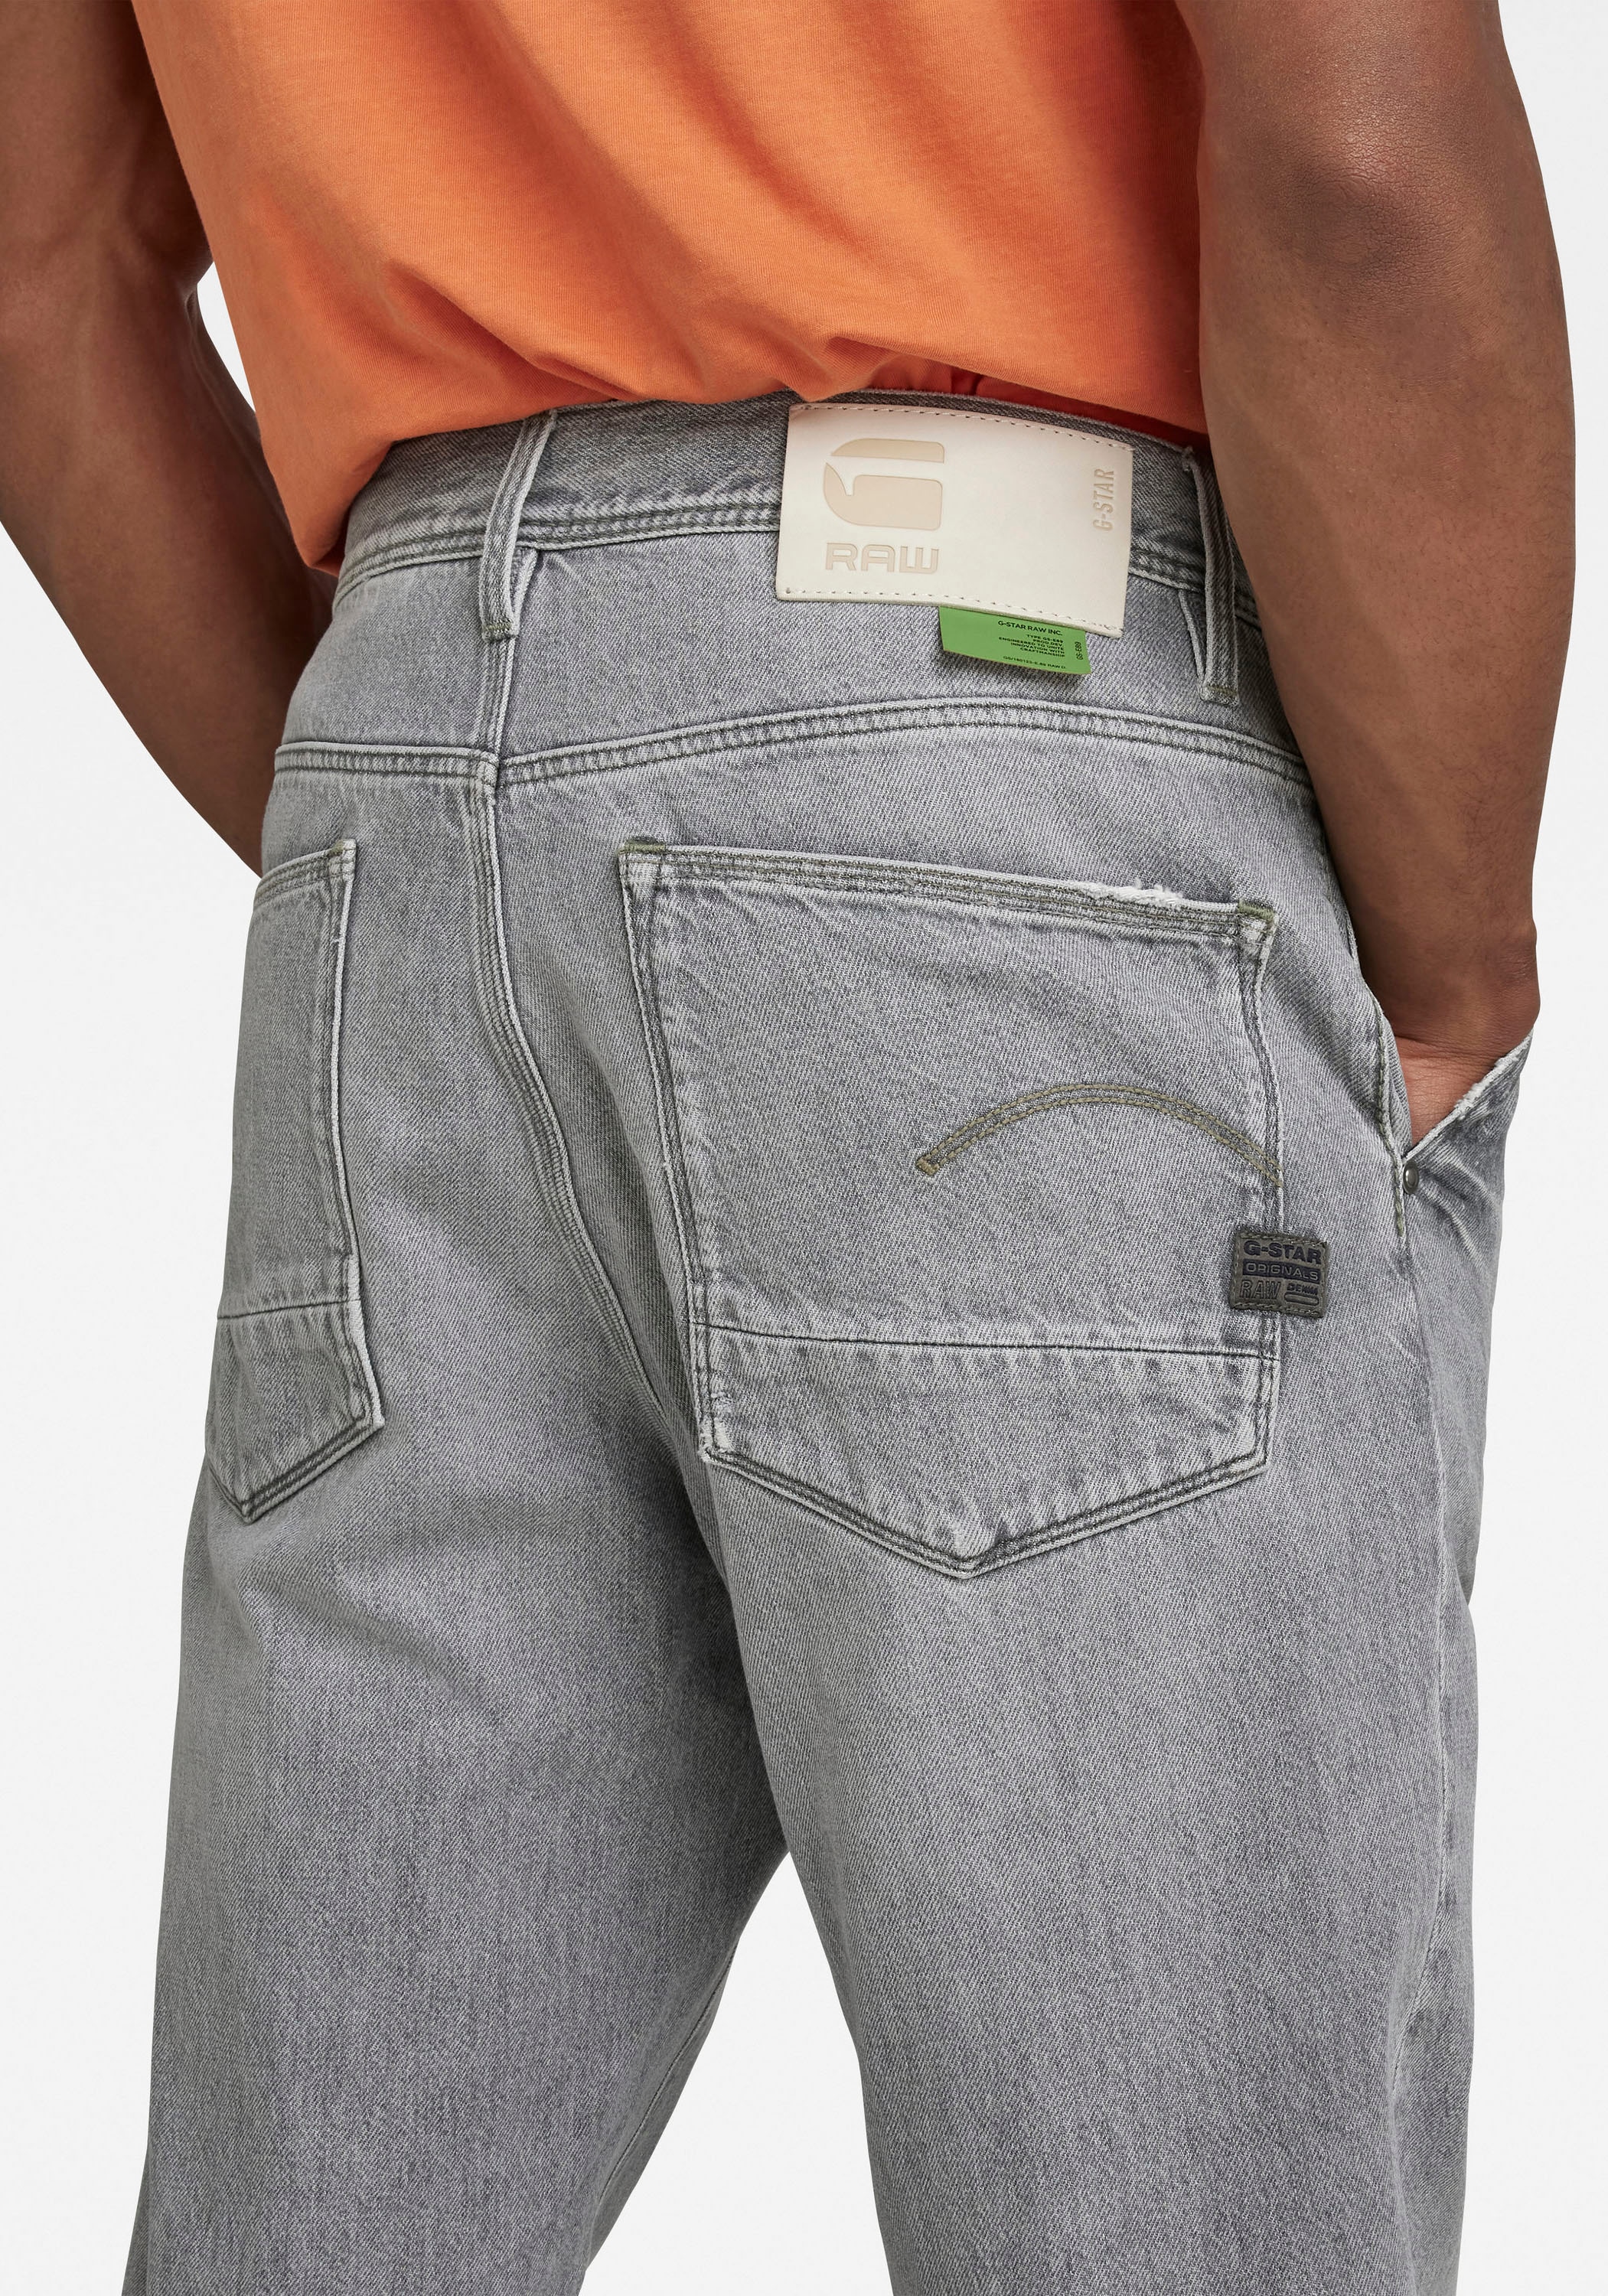 G-Star RAW shoppen Tapered-fit-Jeans online »Relaxed | 3d« Tapered Grip Jelmoli-Versand